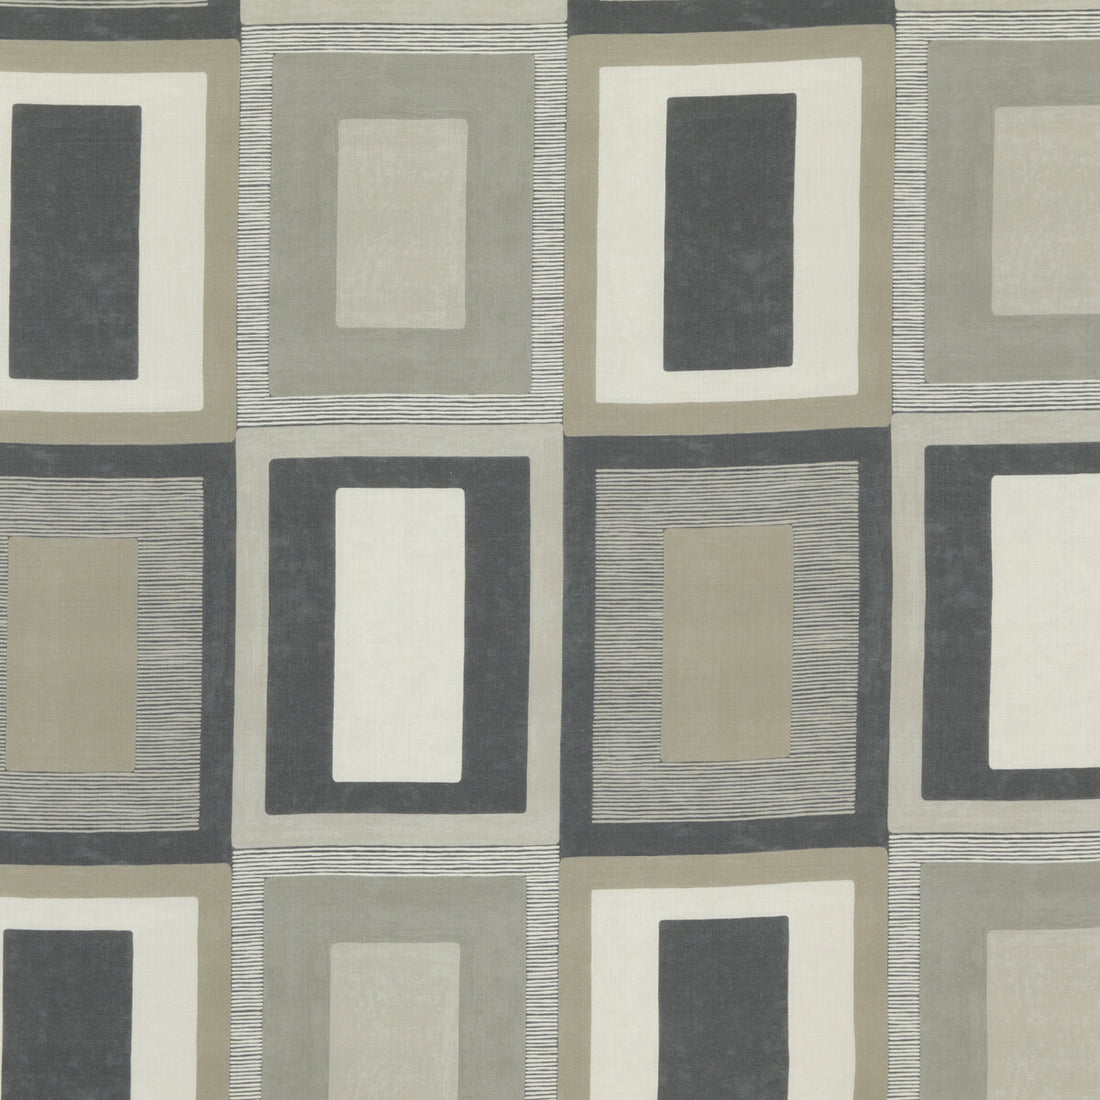 Moro fabric in linen/charcoal color - pattern ED75026.2.0 - by Threads in the Moro collection